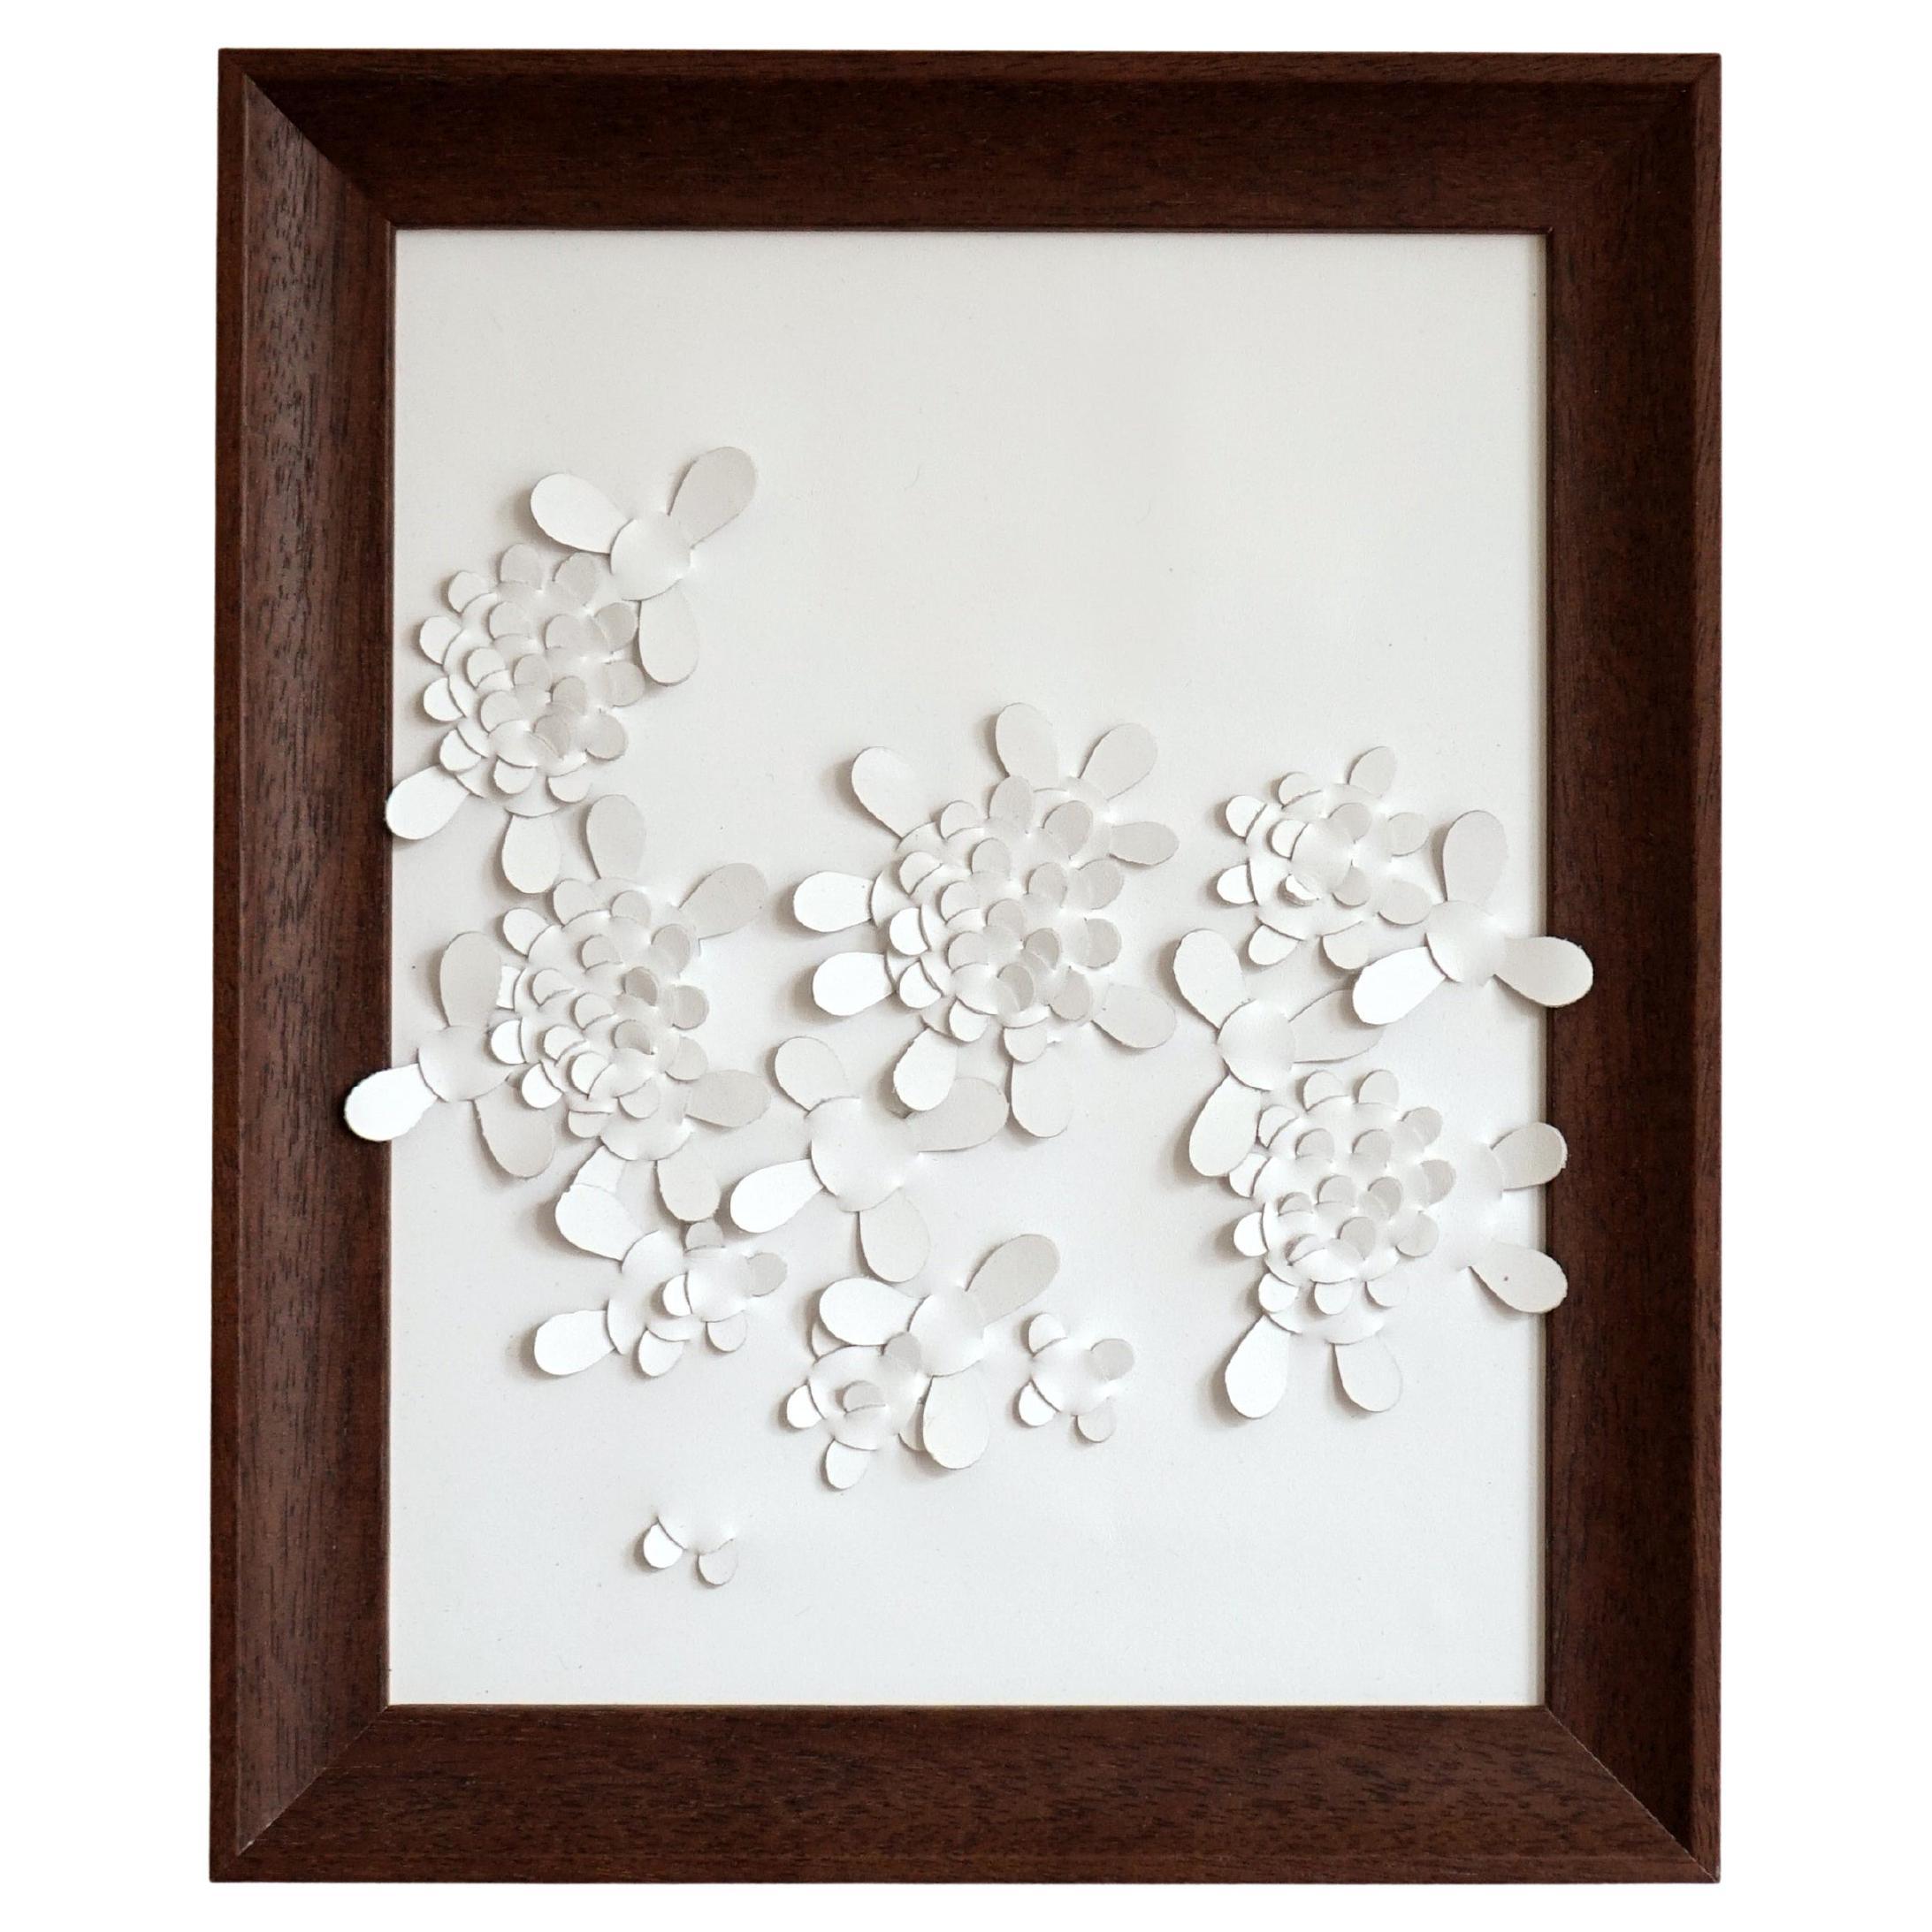 Wildflower: A Piece of 3D Sculptural White Leather Wall Art